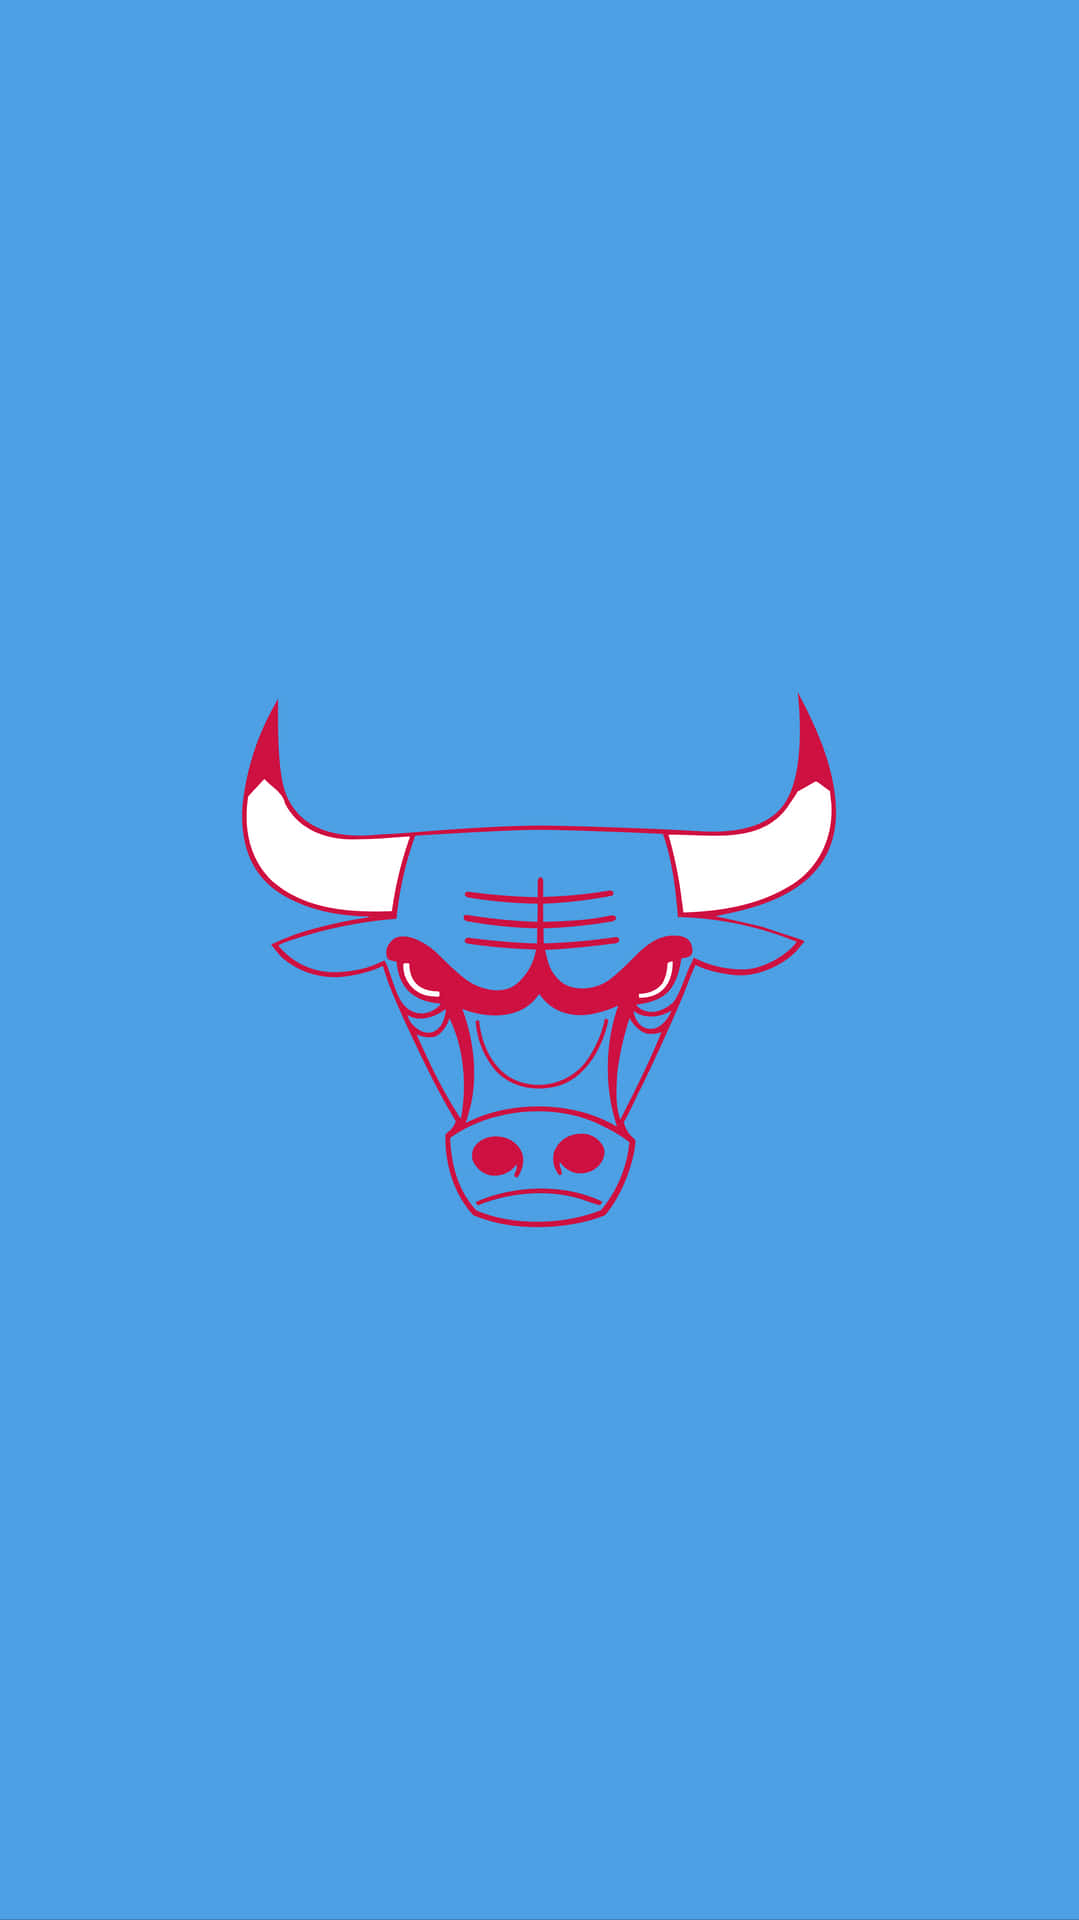 Get ahead of the competition with this snazzy Chicago Bulls Iphone wallpaper Wallpaper